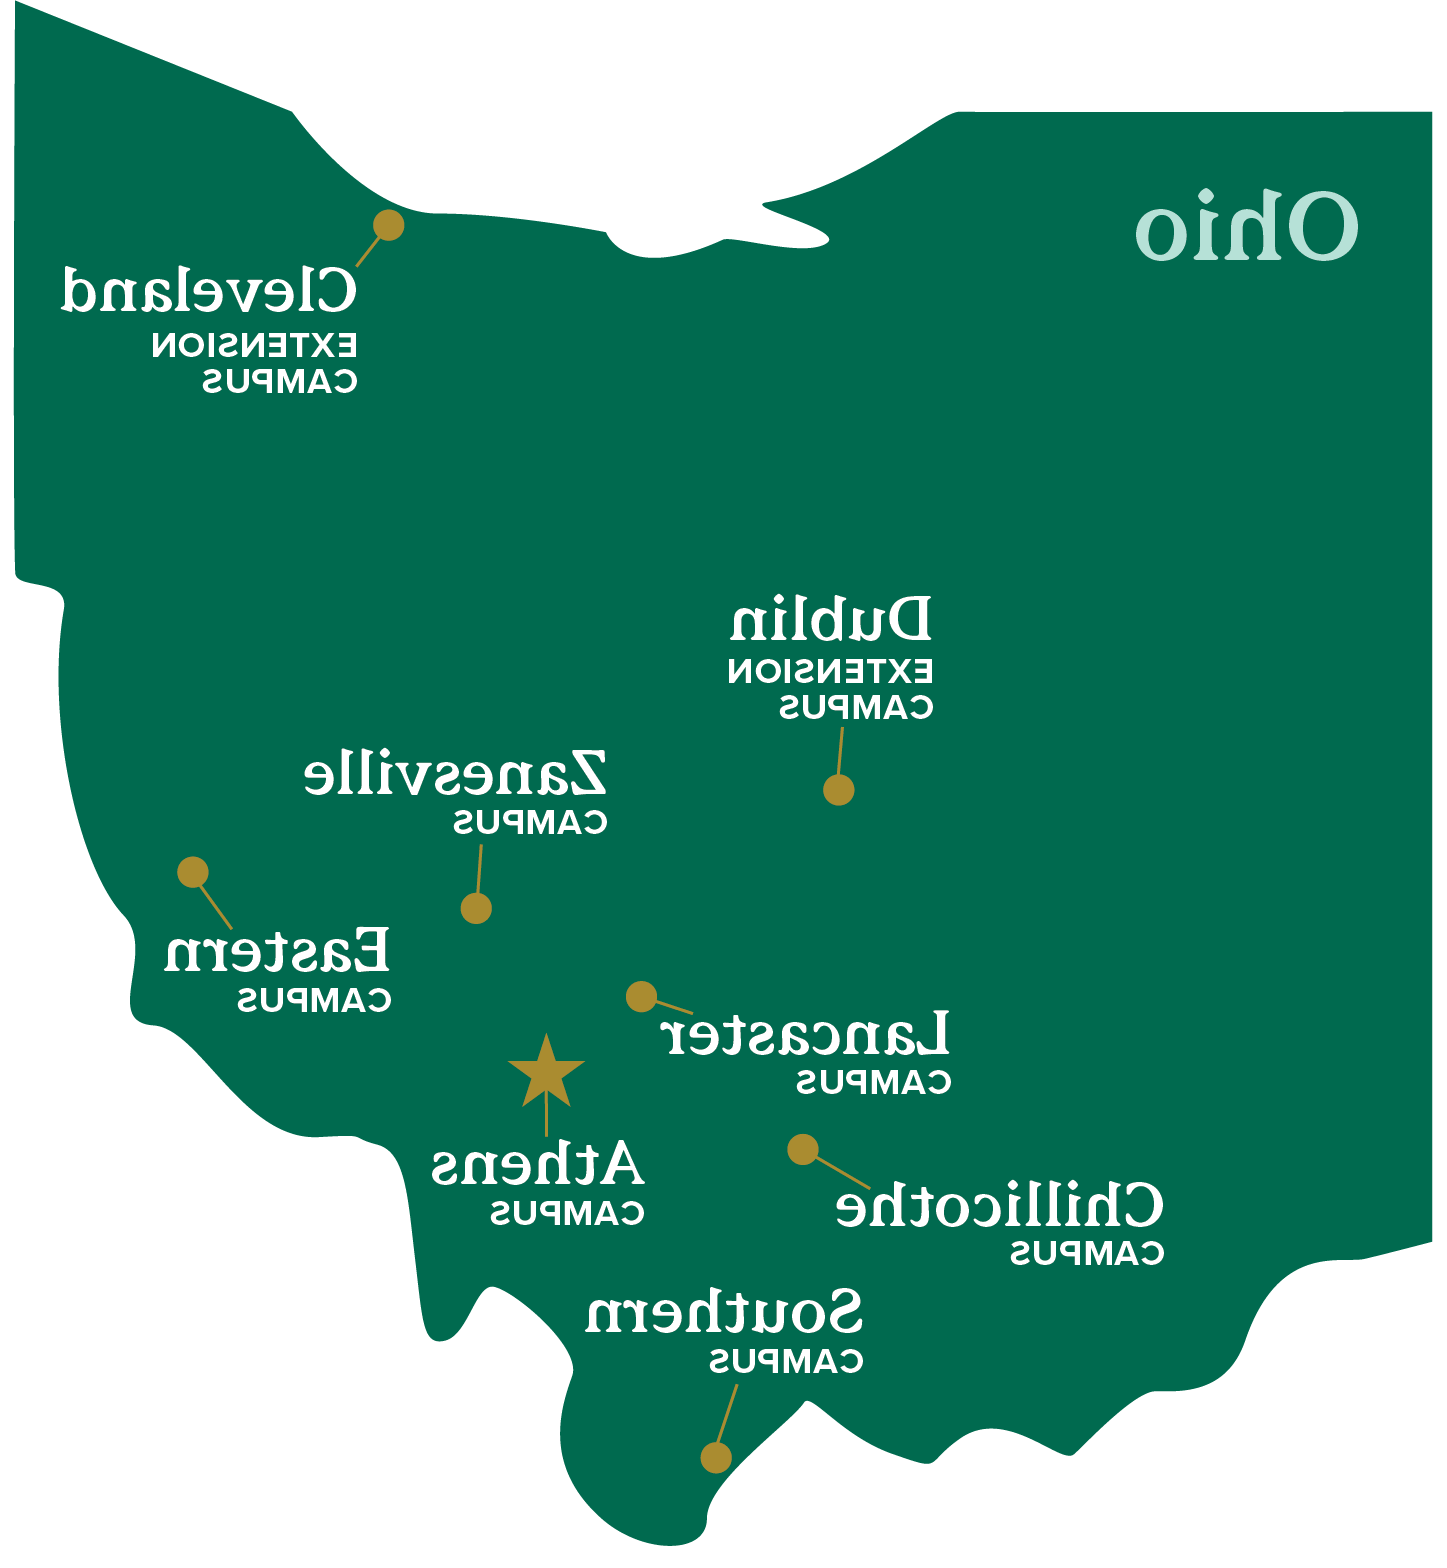 map of the state of Ohio with indicators for each newbb电子平台 campus